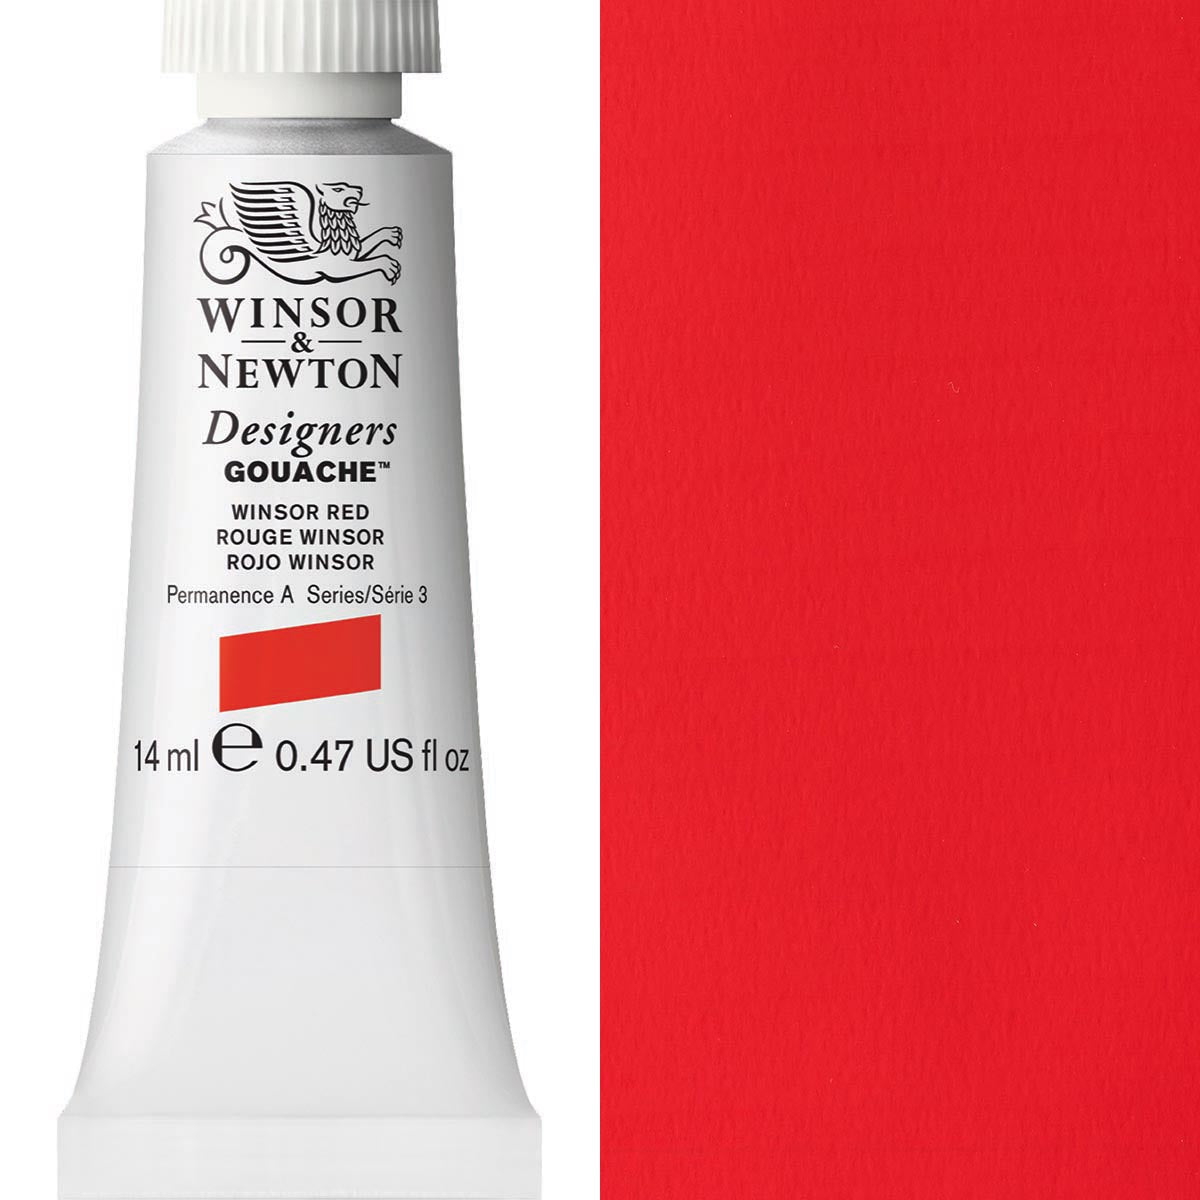 Winsor and Newton - Designers Gouache - 14ml - Winsor Red